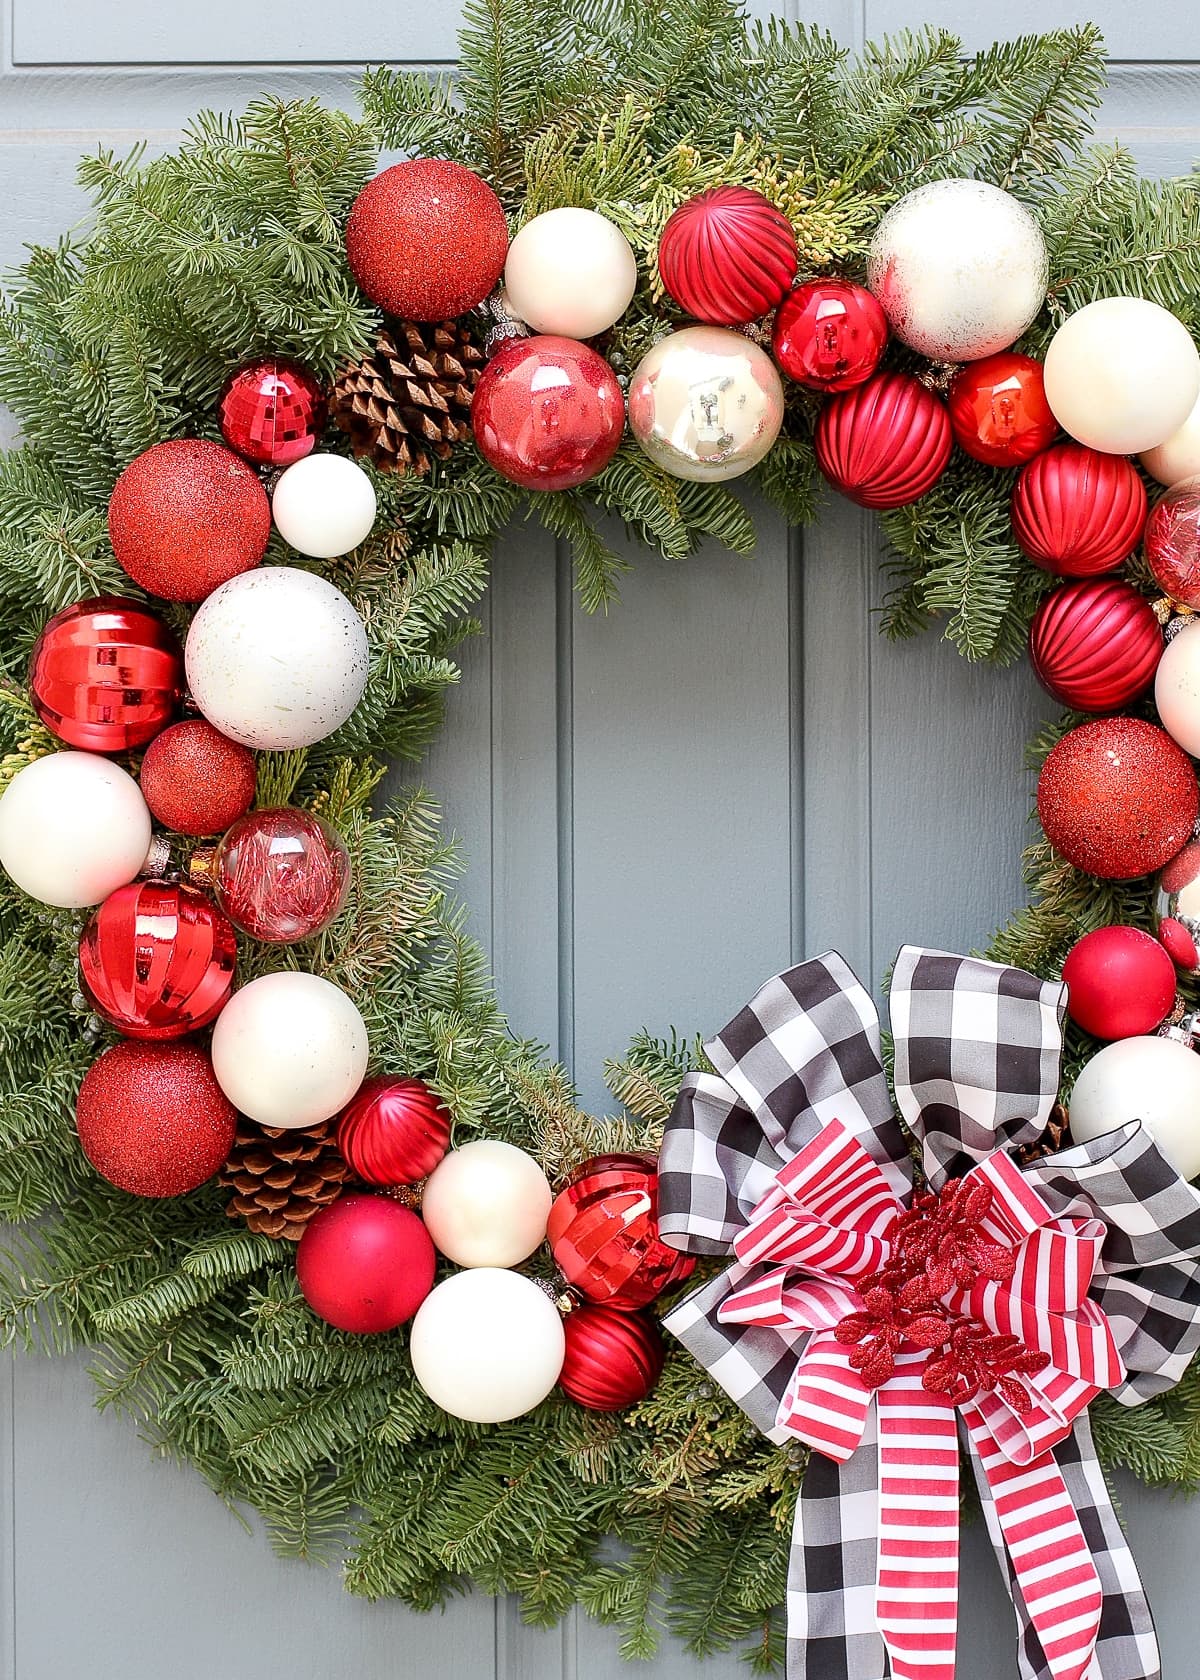 Red and white ornaments on a pine wreath